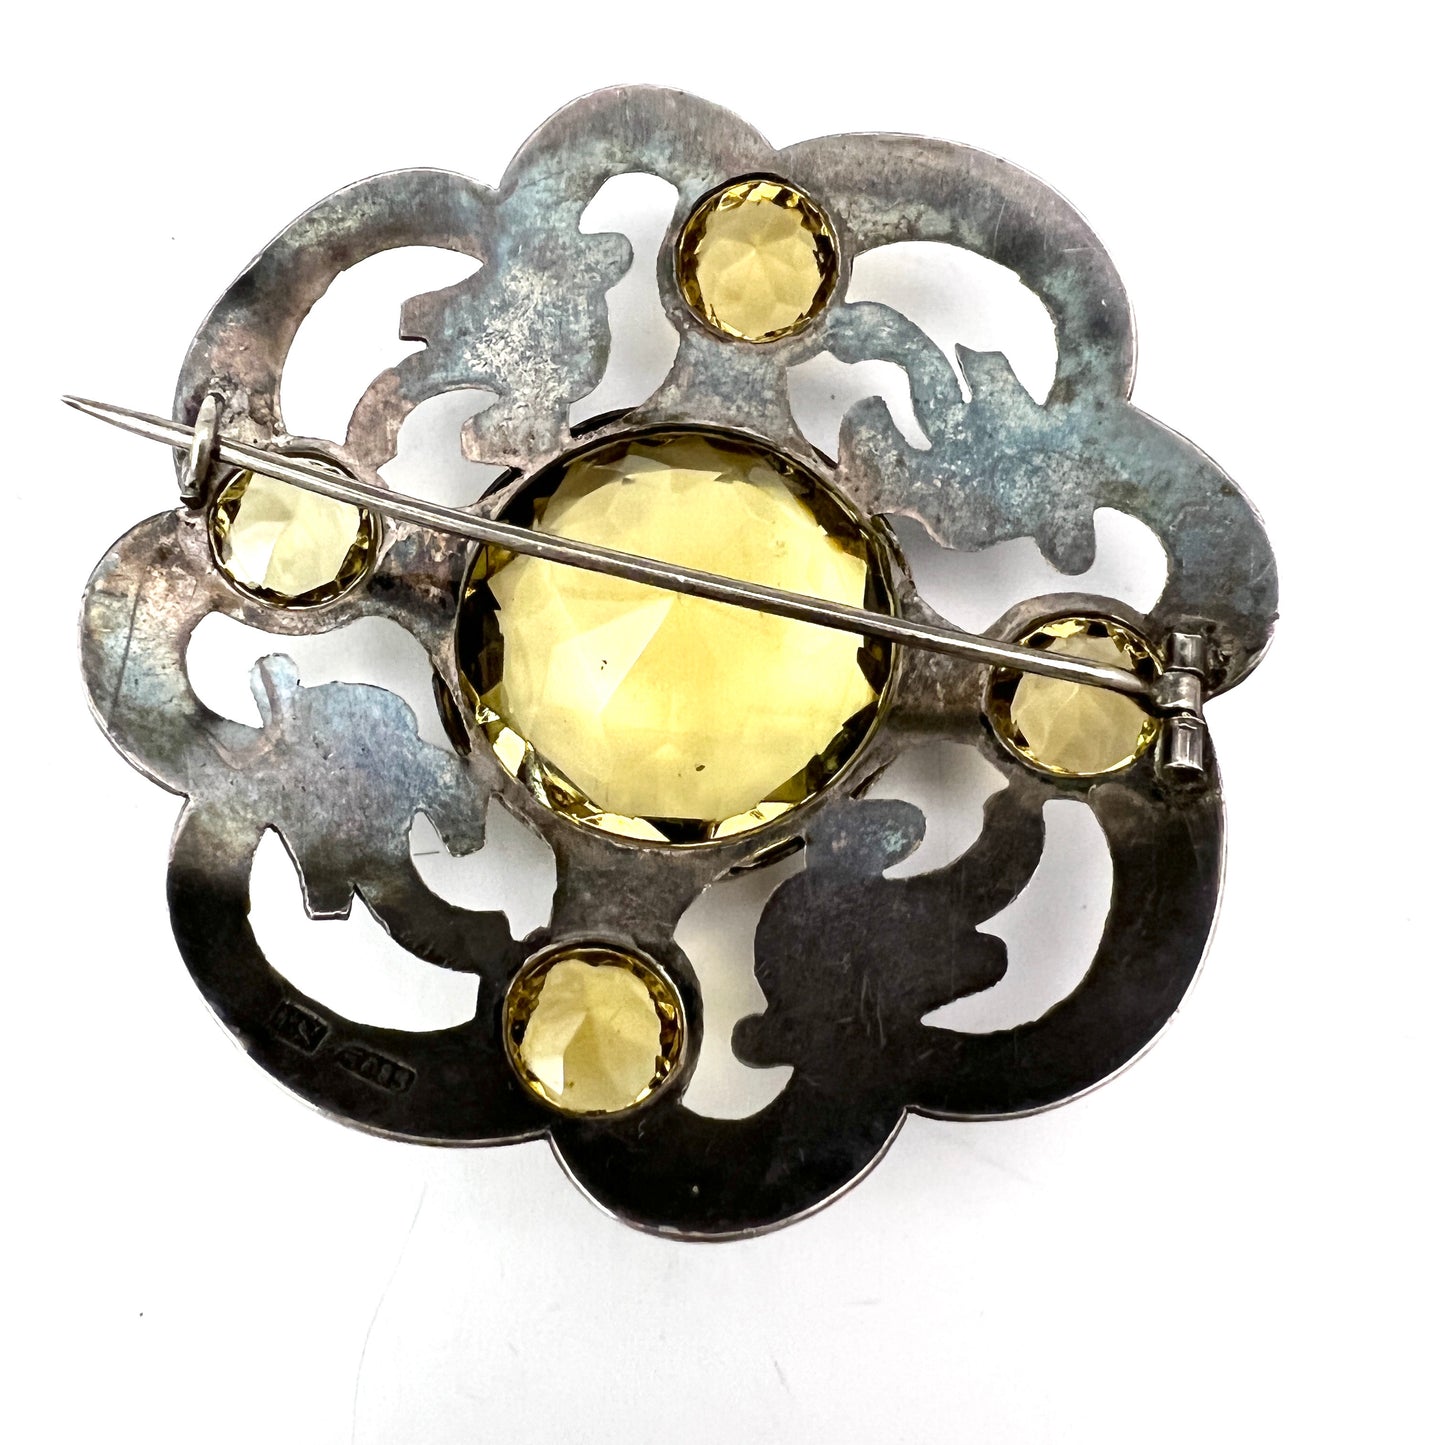 S.L Jacobsen & Co, Denmark 1910-20s Large Antique Solid Silver Paste Stone Brooch